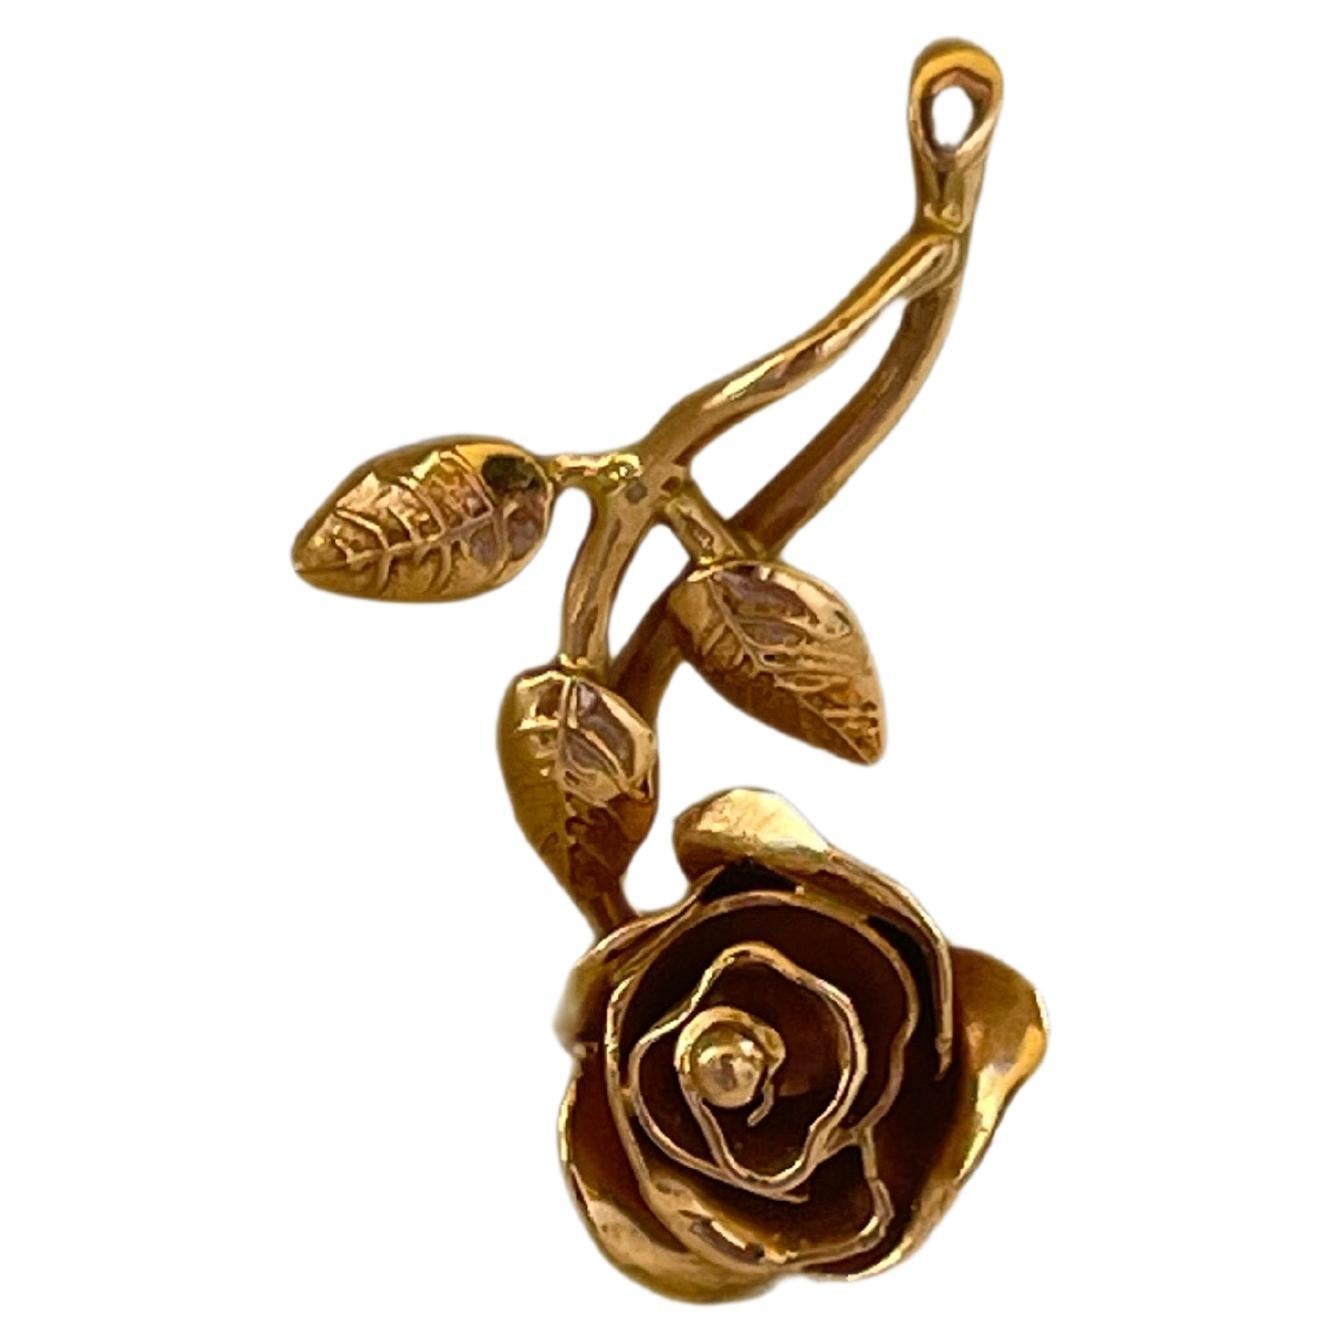 Stunning polished rose gold charm in 14KT rose gold, hand carved. Made to order will take 10 business days.

GRAM WEIGHT: 2.36gr
GOLD: 14KT rose gold
Size: 1 inches long

WHAT YOU GET AT STAMPAR JEWELERS:
Stampar Jewelers, located in the heart of